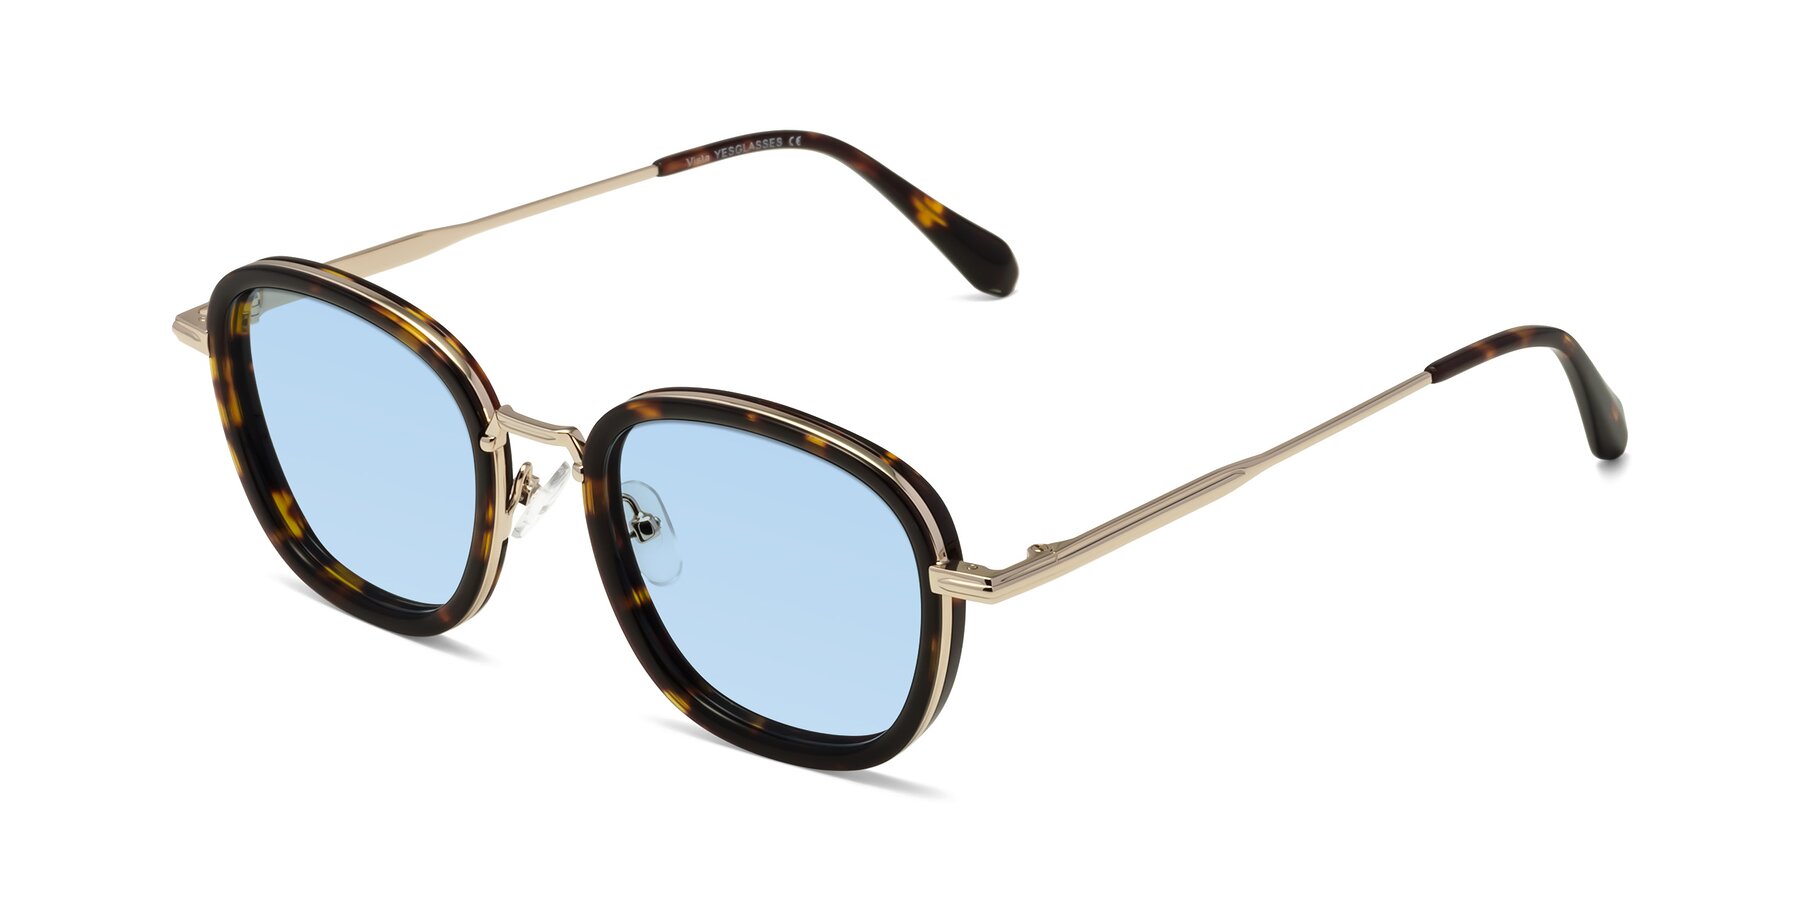 Angle of Vista in Tortoise-Light Gold with Light Blue Tinted Lenses